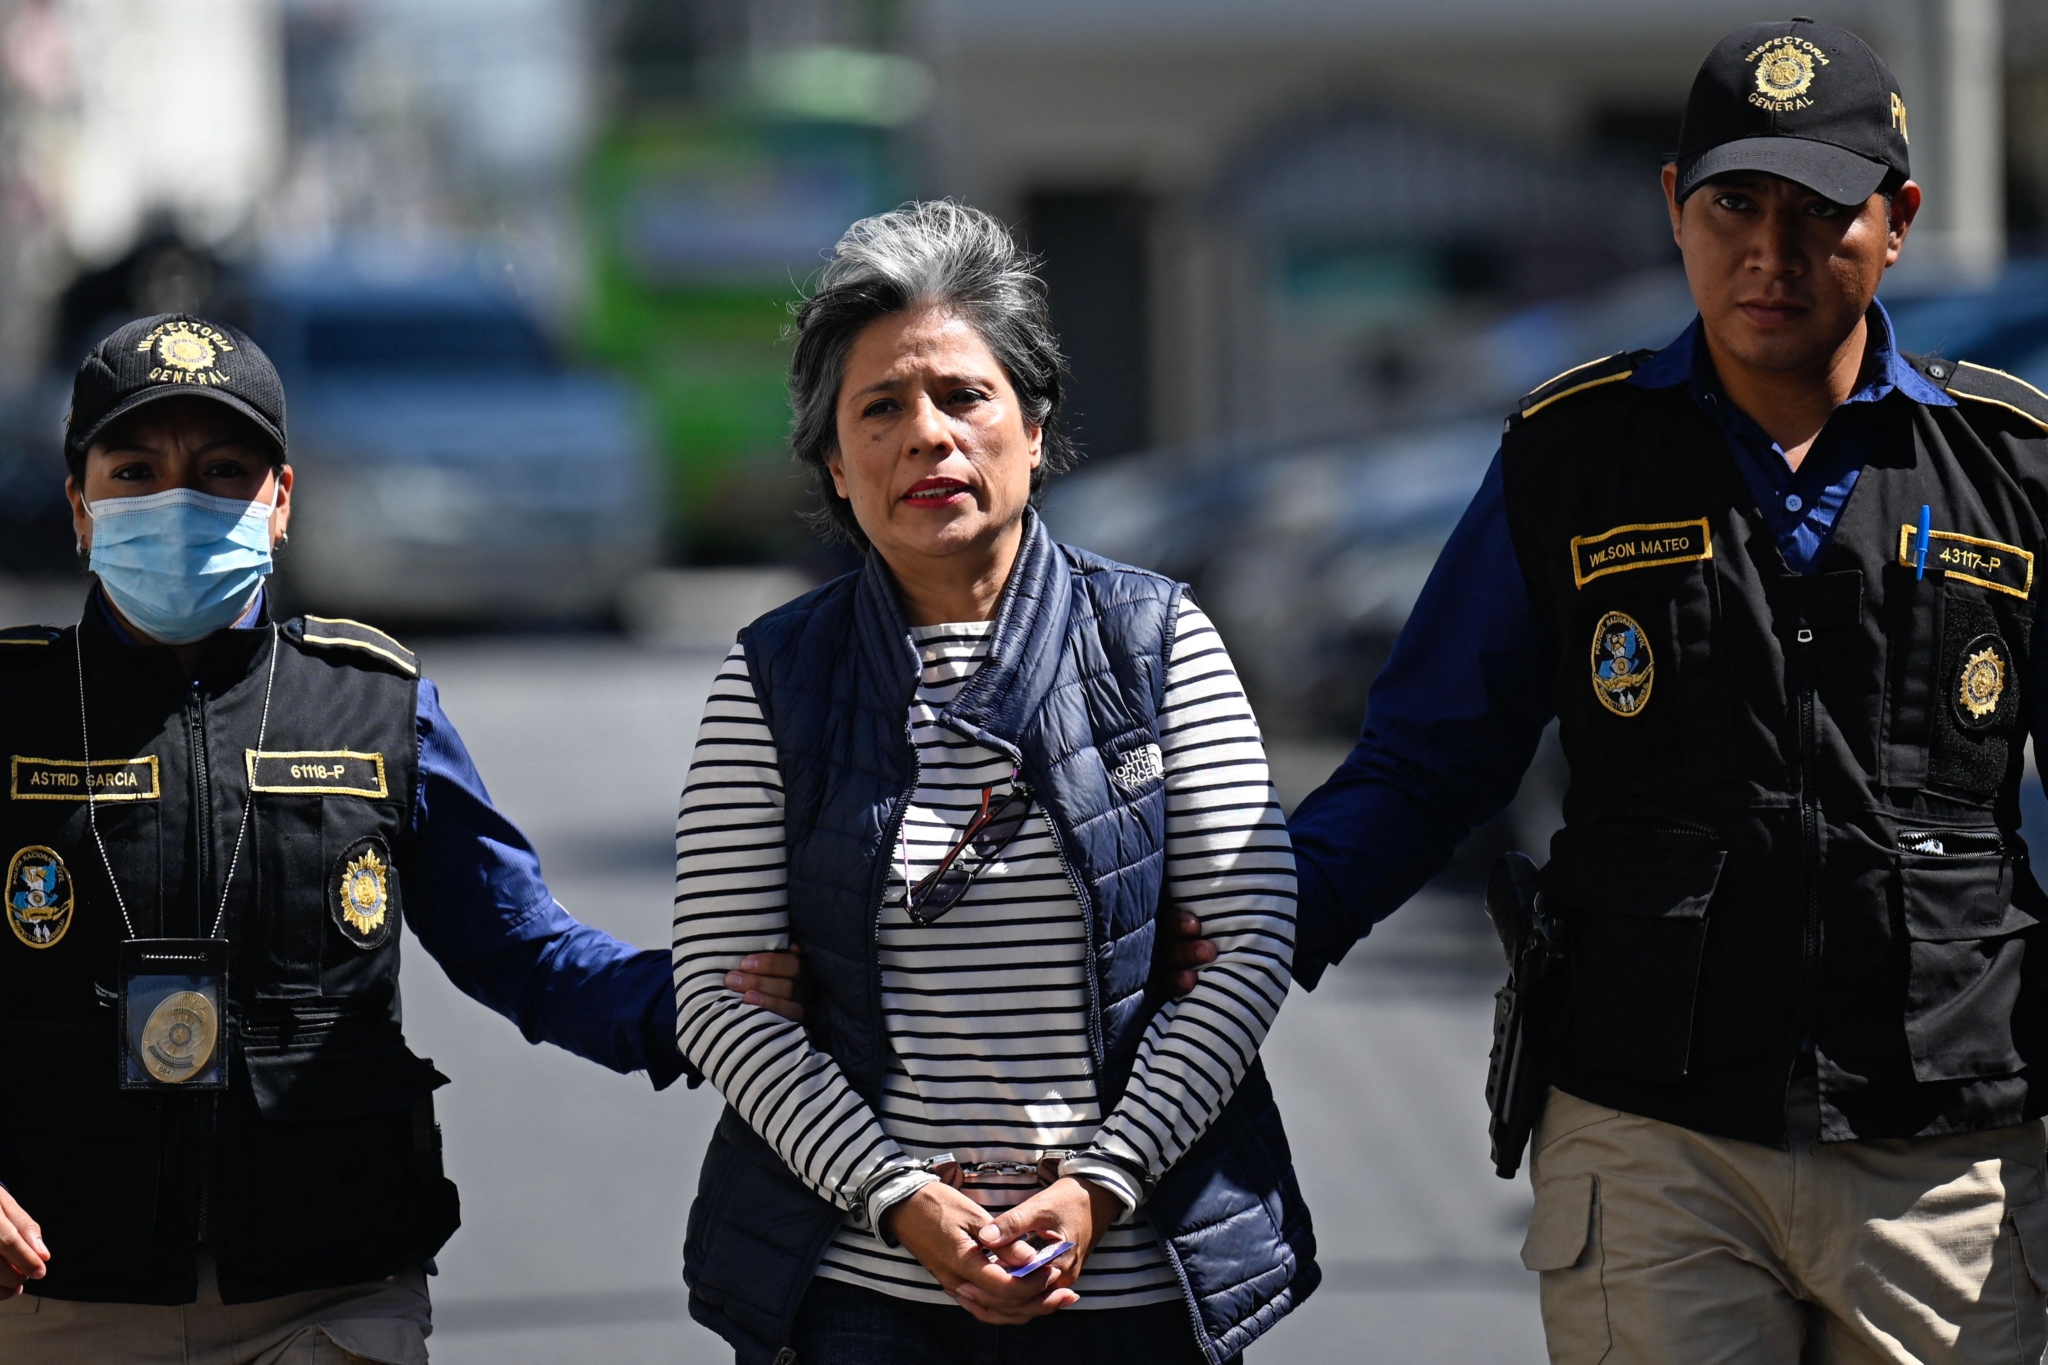 Lawyer and human rights defender Claudia Gonzalez is led away by police in handcuffs.